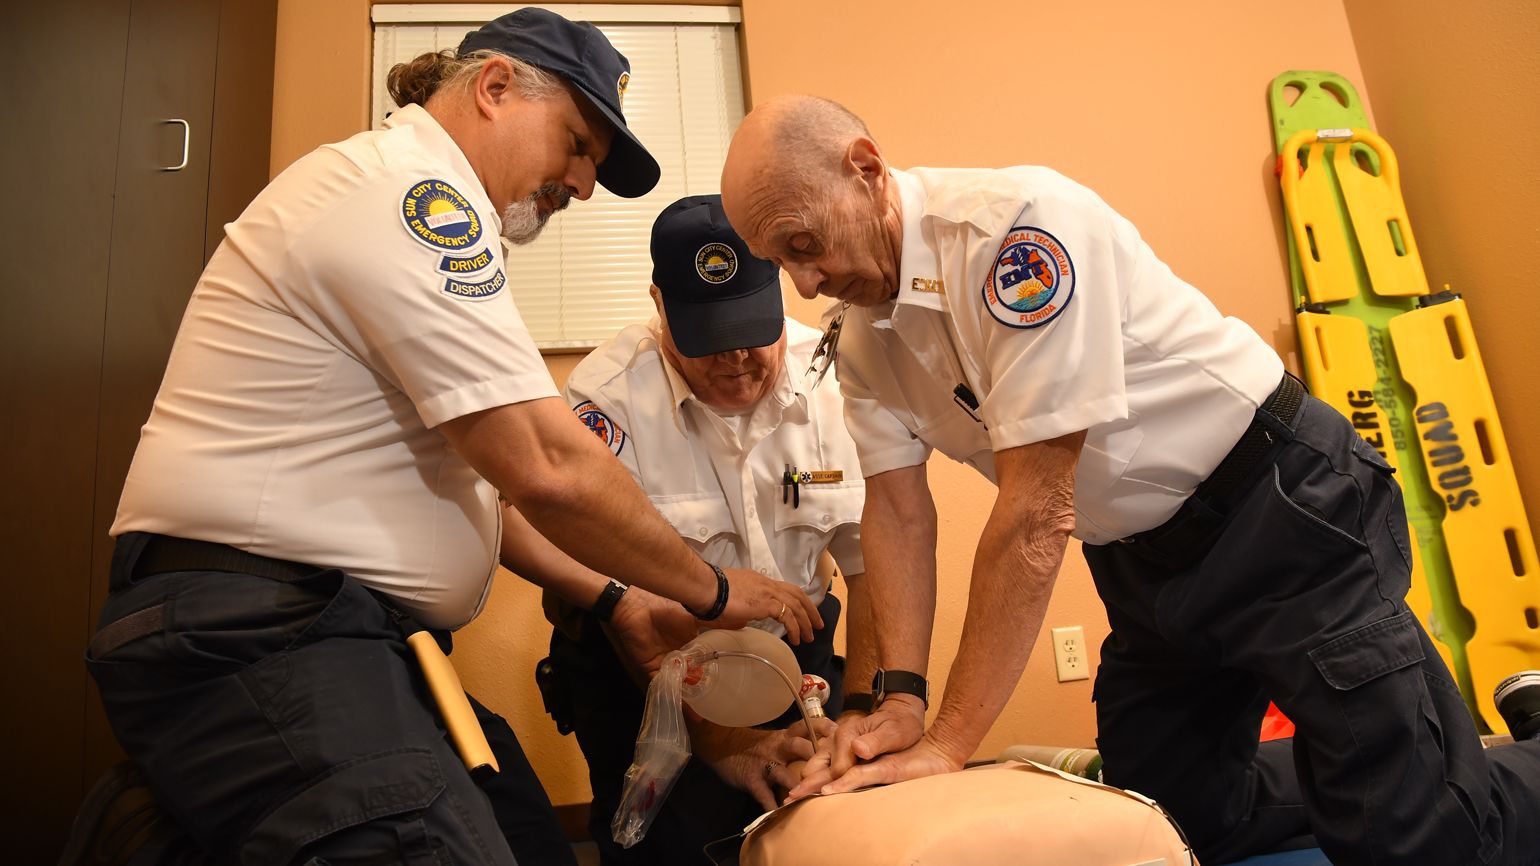 Captain Robert Leonard leading a team in a CPR drill. The EMR, EMT, and ambulance driver all have roles providing lifesaving CPR to a patient.